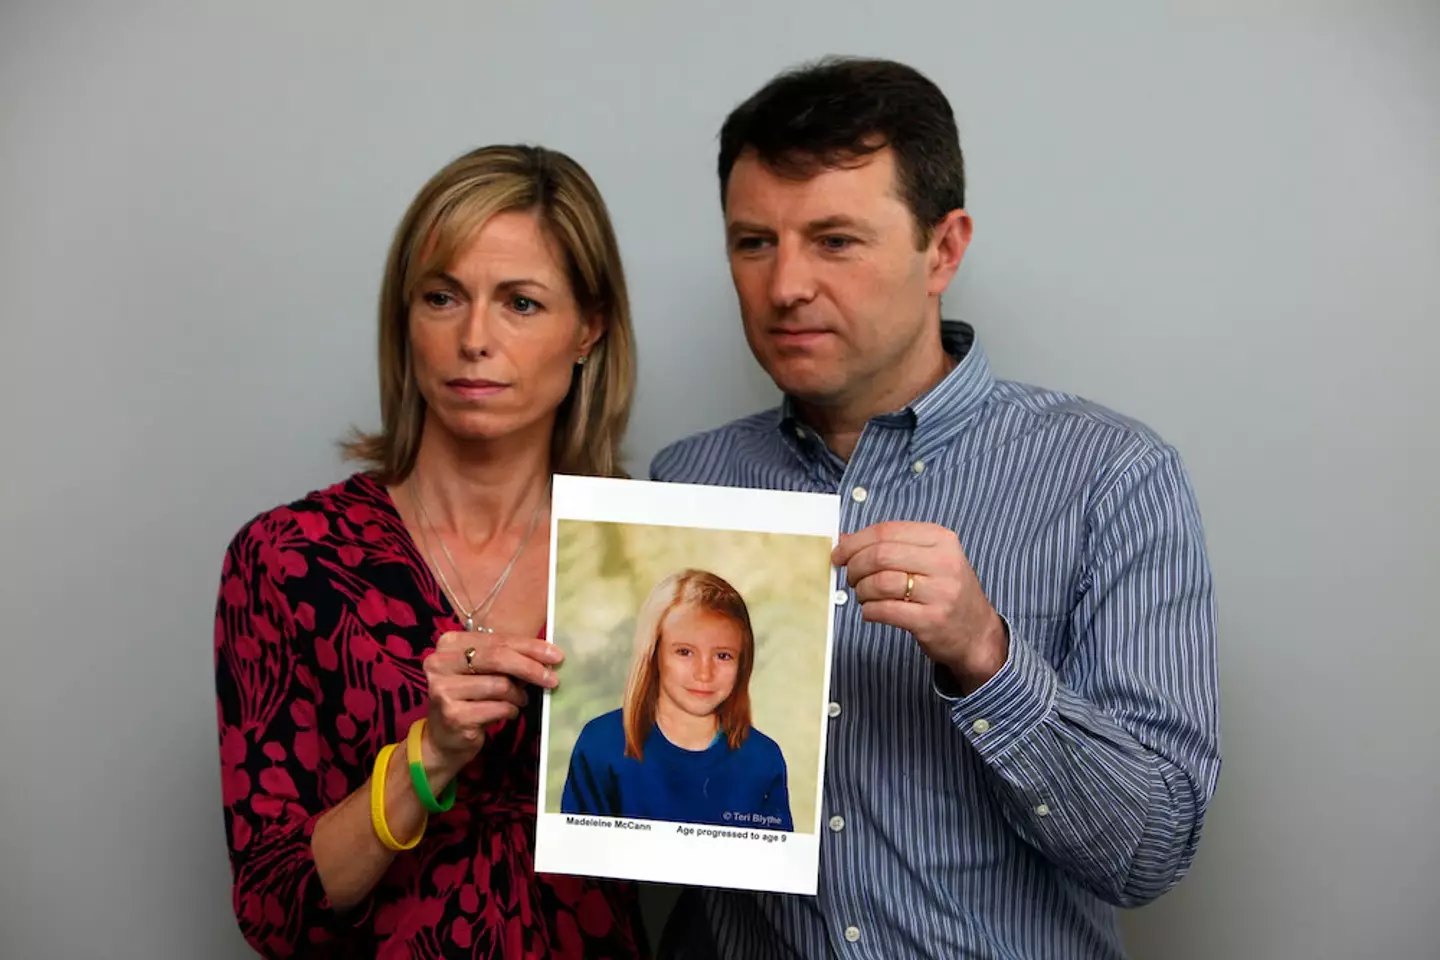 Madeleine McCann went missing while on holiday with her parents Kate and Gerry McCann in 2007.